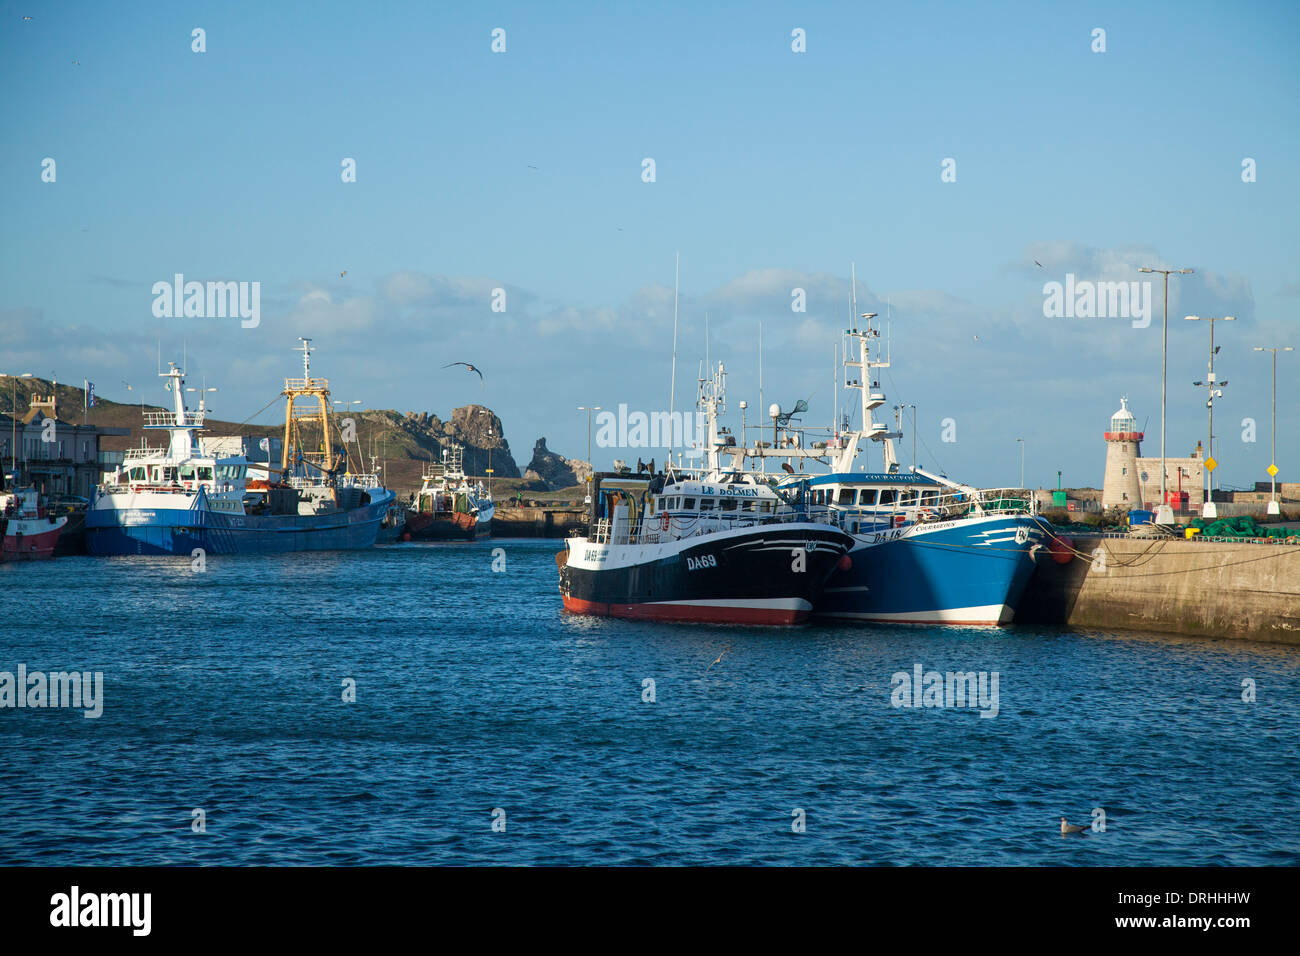 Fishing trawlers moored in Howth harbour, County Dublin, Ireland. Stock Photo